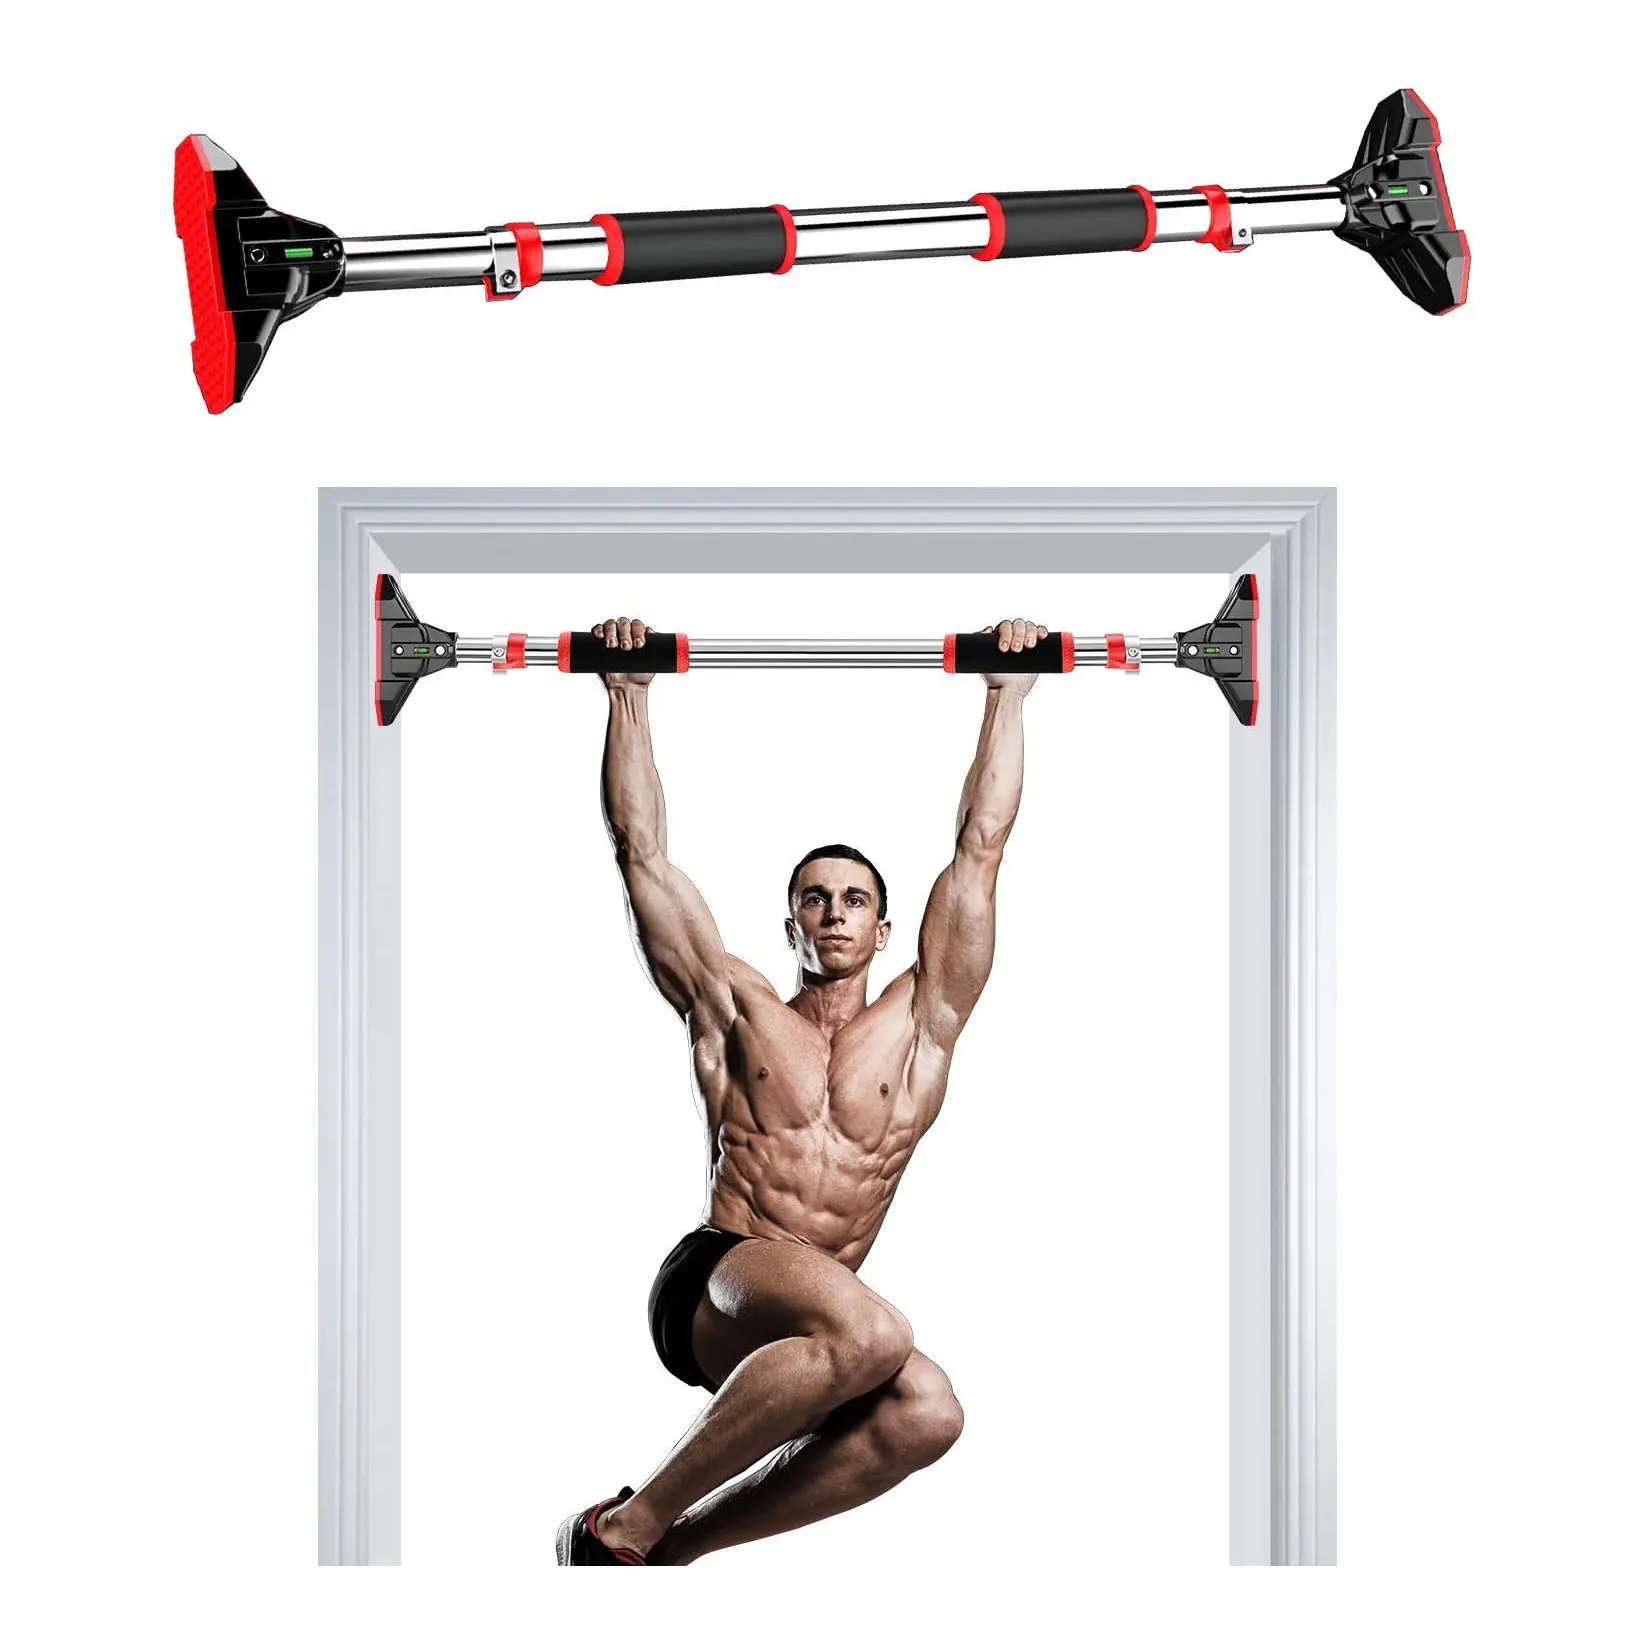 FDFIT Wholesale adjusted horizontal pull up bar Auto Locking Doorway Chin up Bar for Arm strength training